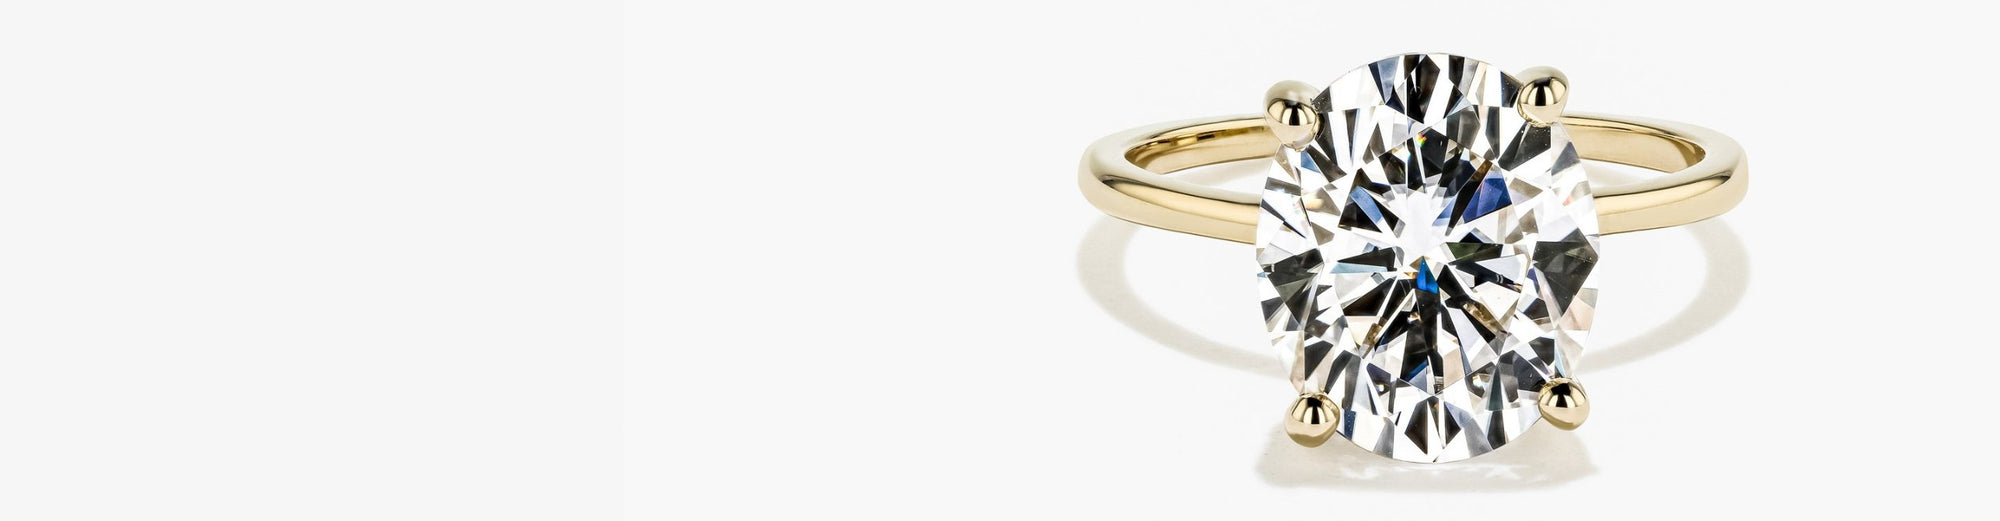 traditional-solitaire-engagement-ring|traditional solitaire engagement ring